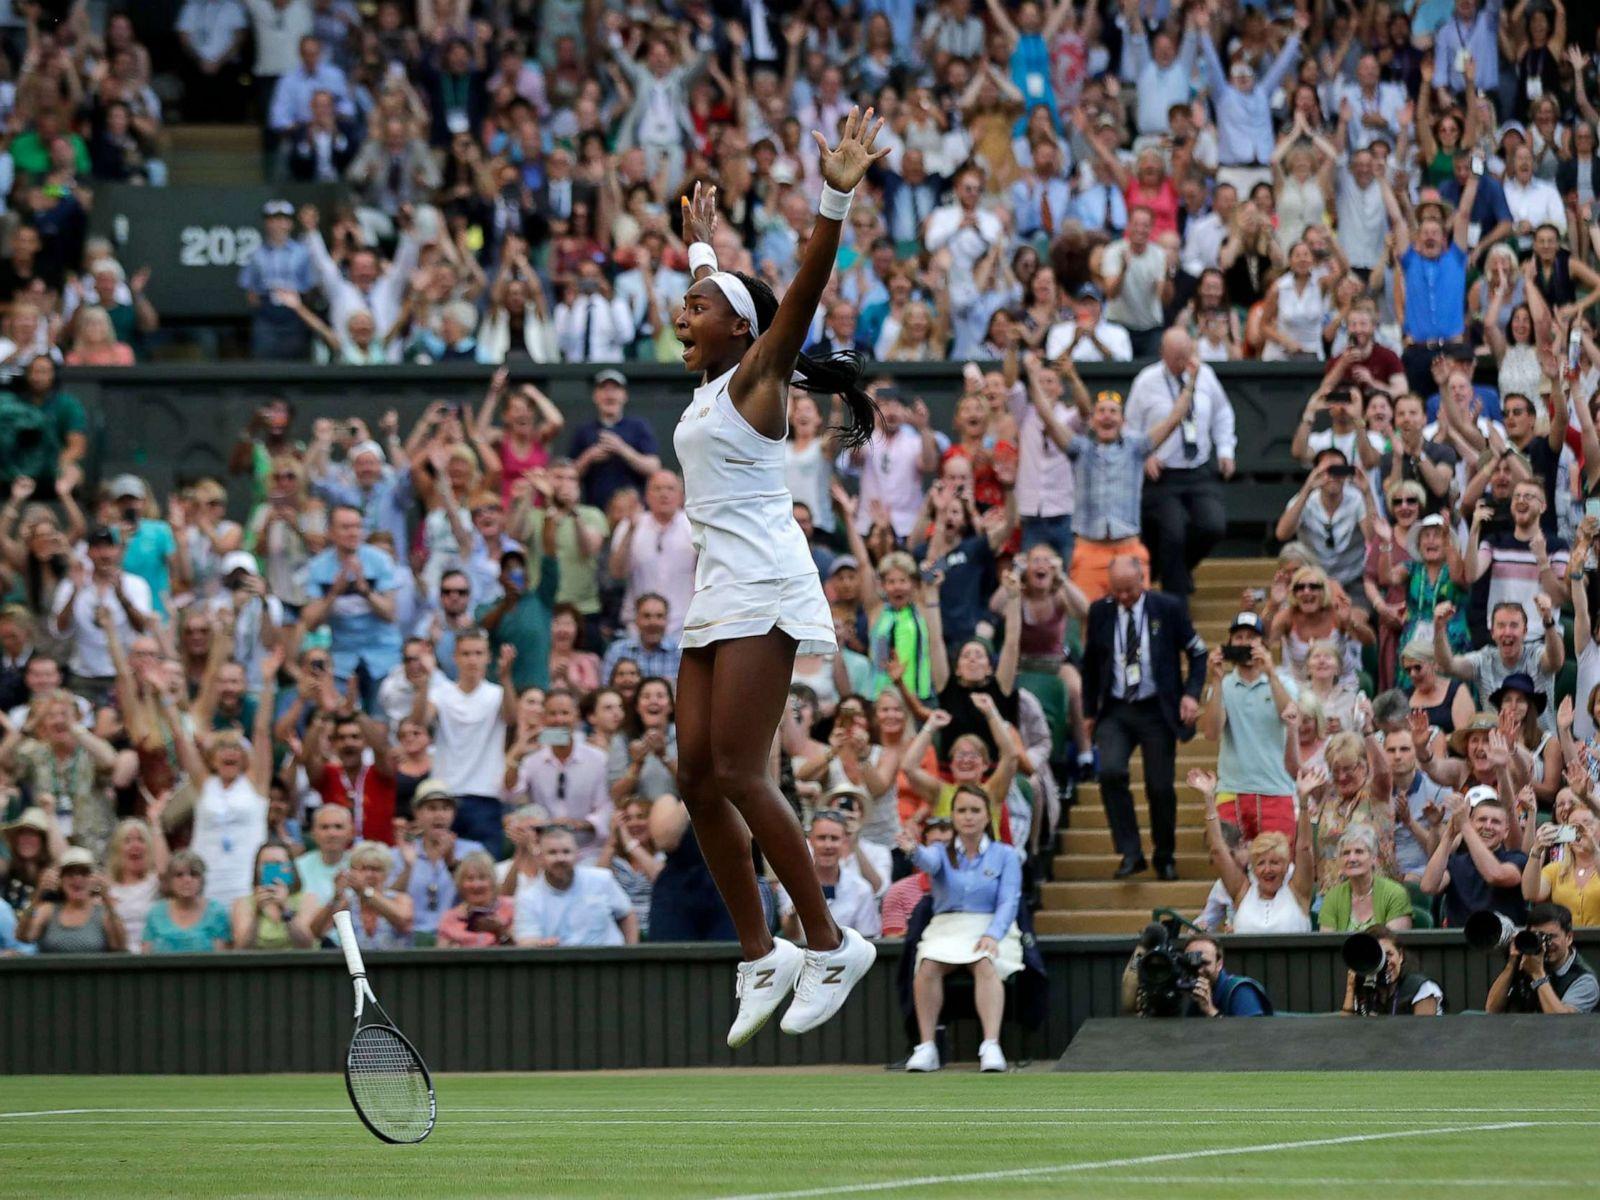 Coco Gauff stages comeback at Wimbledon, defeats Polona Hercog to